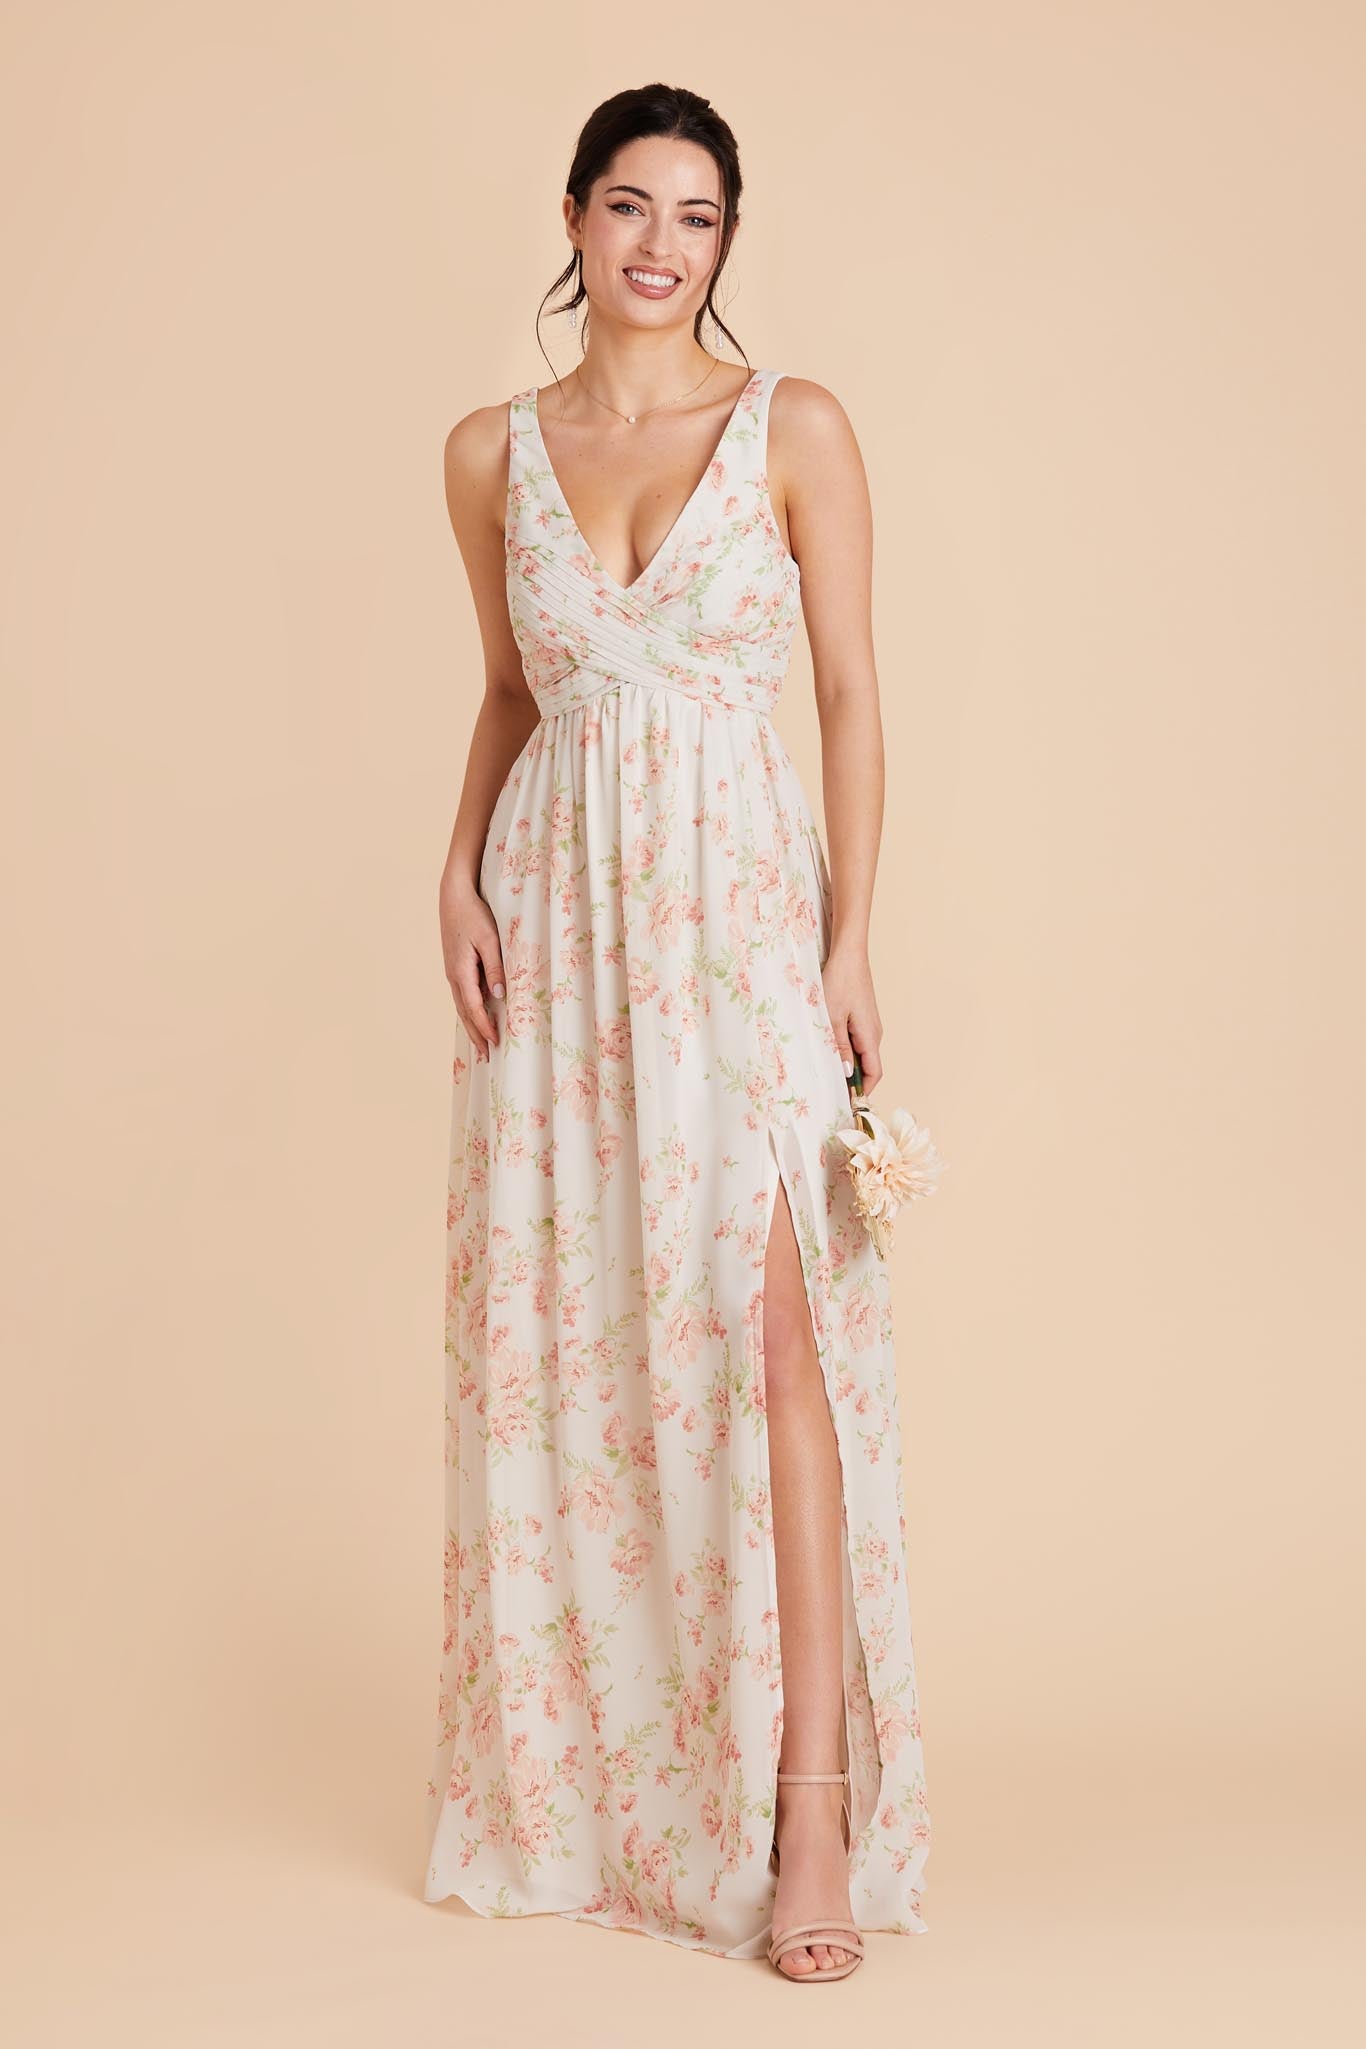 Whimsical Blooms Laurie Empire Dress by Birdy Grey